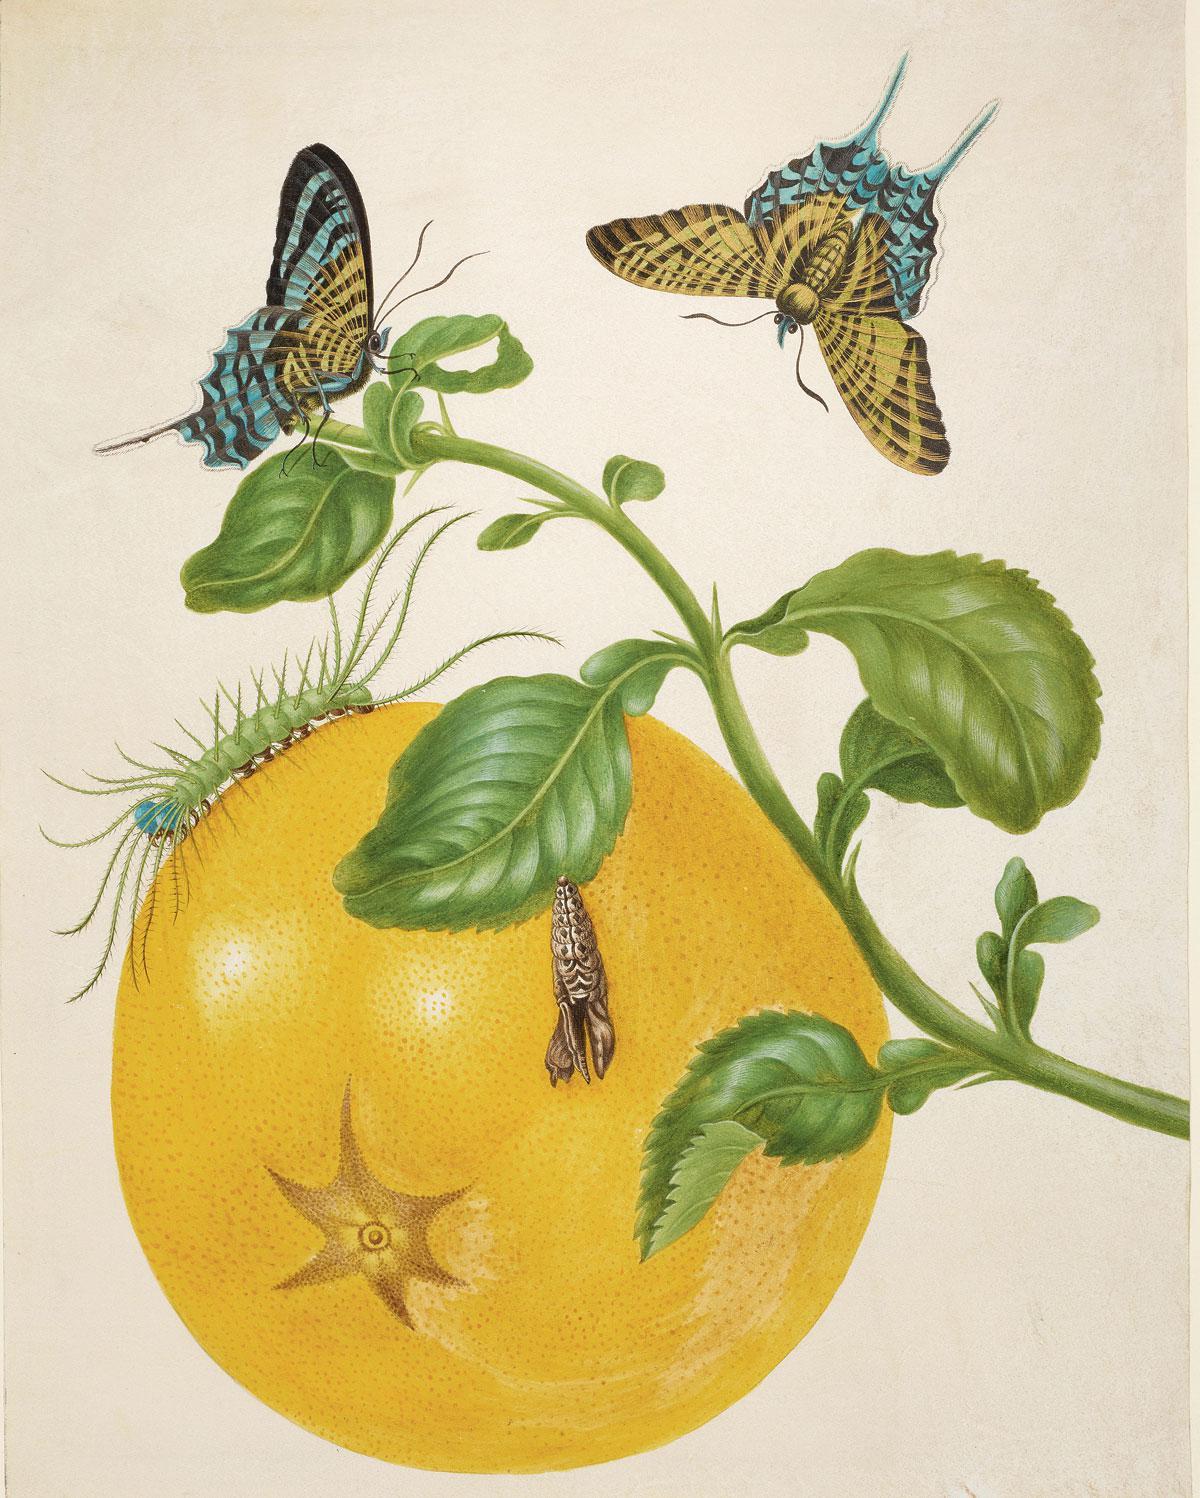 The 17th-century German artist Maria Sibylla Merian was an expert on insects.